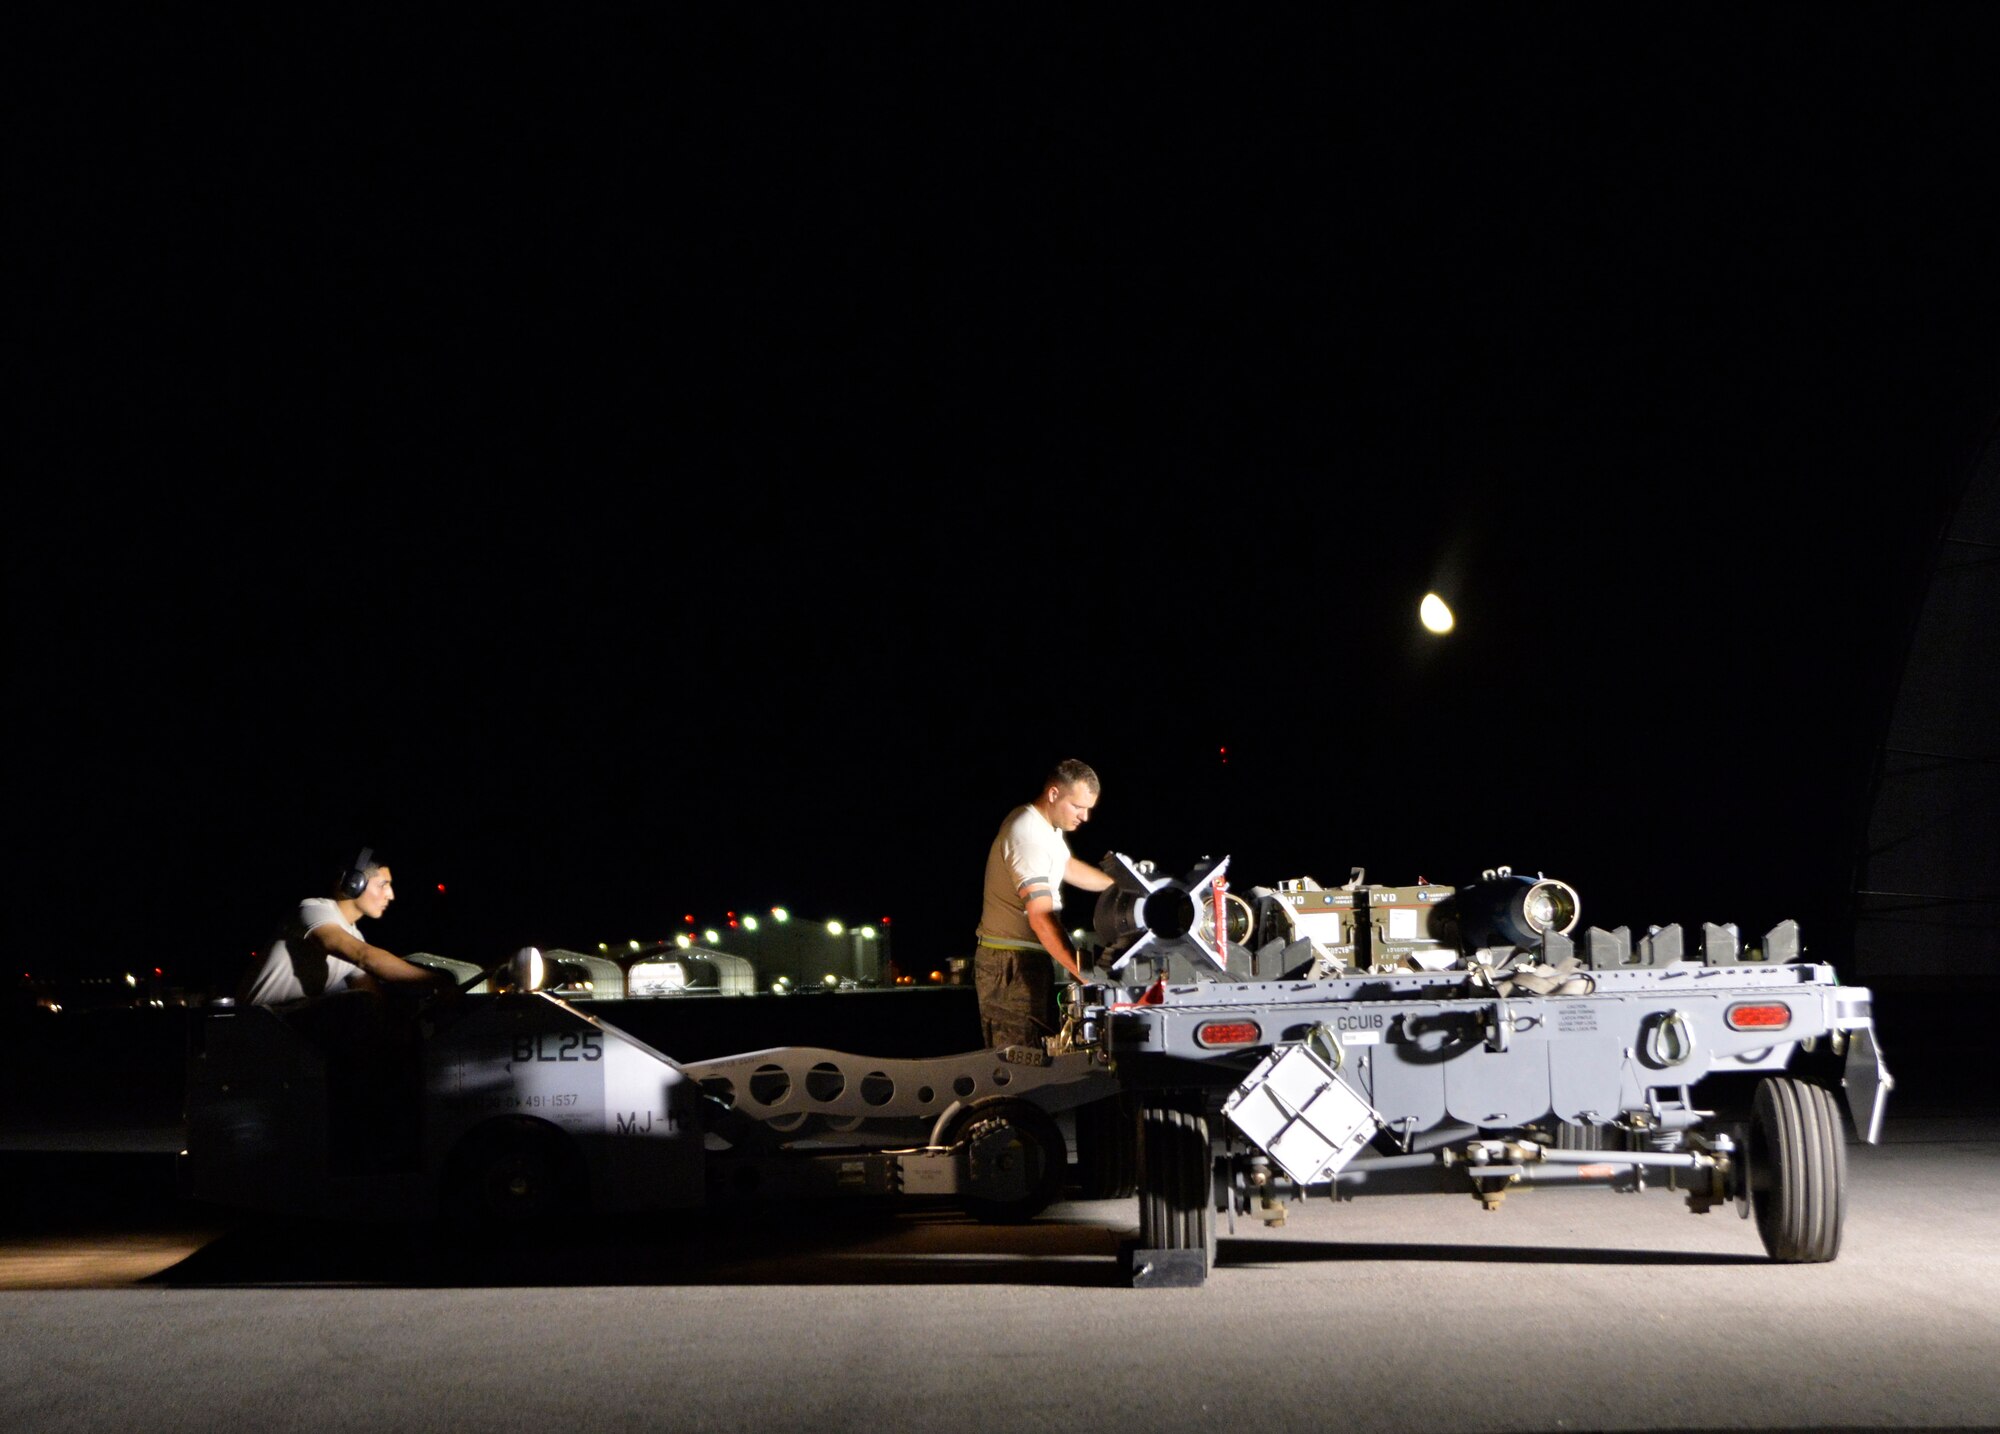 Airman 1st Class Ricardo Garcia, 432nd Aircraft Maintenance Squadron weapons load crew member, left, and Staff Sgt. Charlie Loper, 432nd AMXS load crew chief, prepare to load GBU-12 Paveway II laser-guided bombs onto an MQ-9 Reaper Aug. 5, 2015, at Creech Air Force Base, Nevada. The maintenance crews loaded the munitions in support of the 2015 Air-Ground Weapons Systems Evaluation Program exercise. (U.S. Air Force photo by Airman 1st Class Christian Clausen/Released)